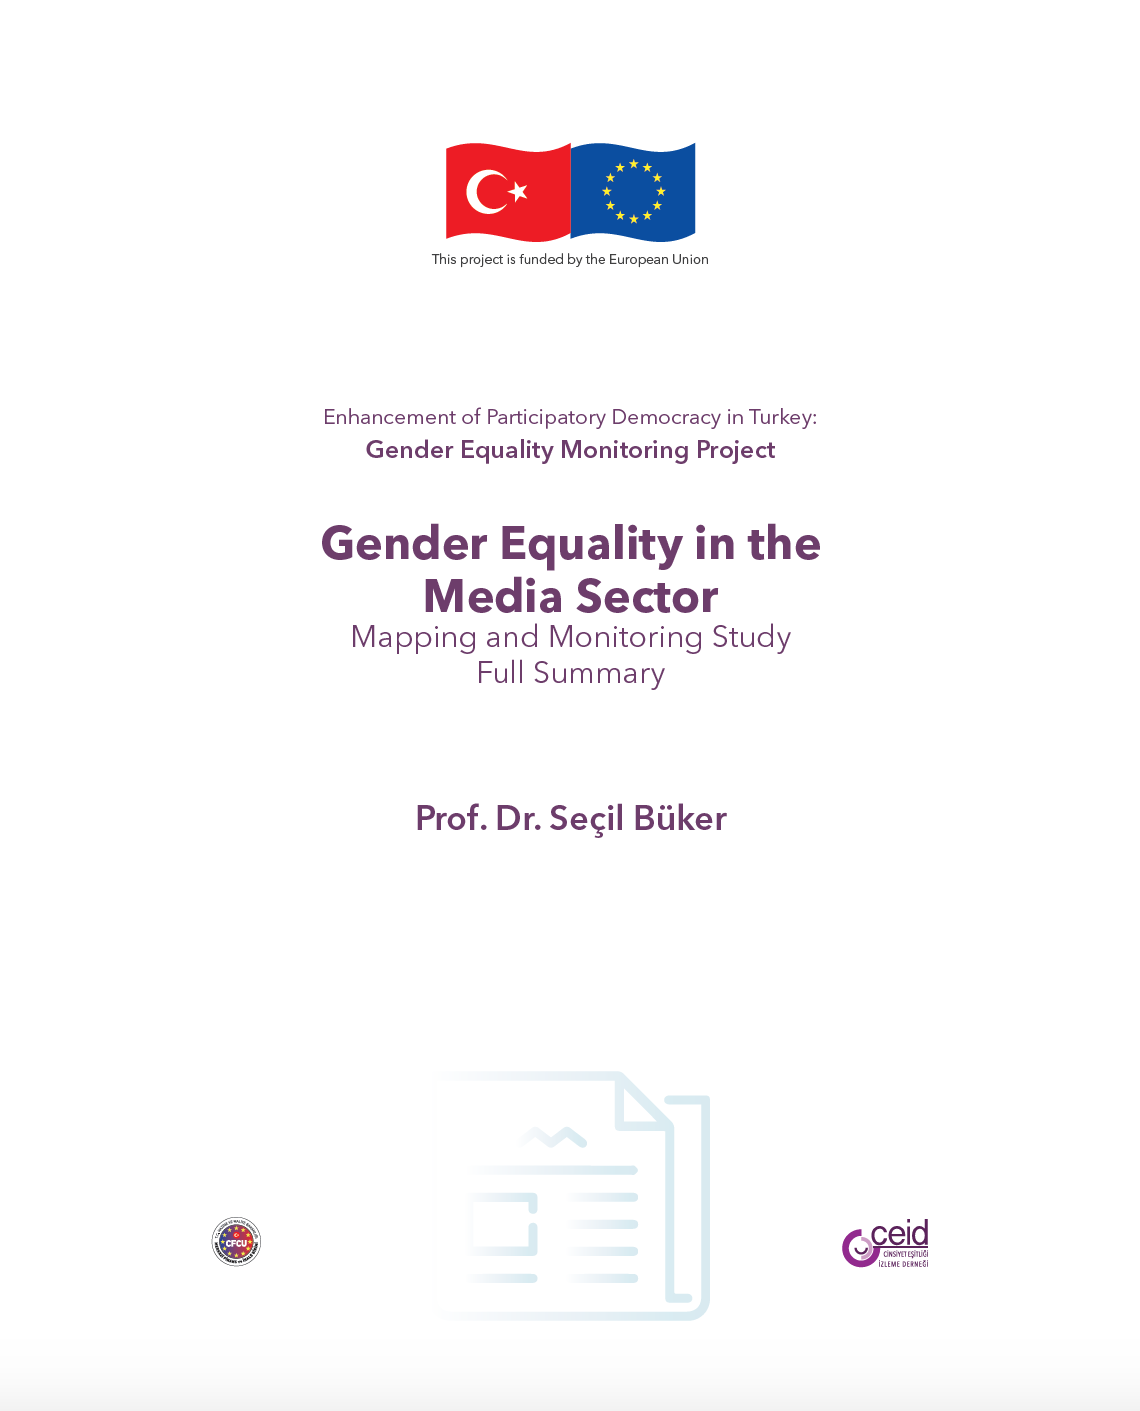 Gender Equality in the Media Sector